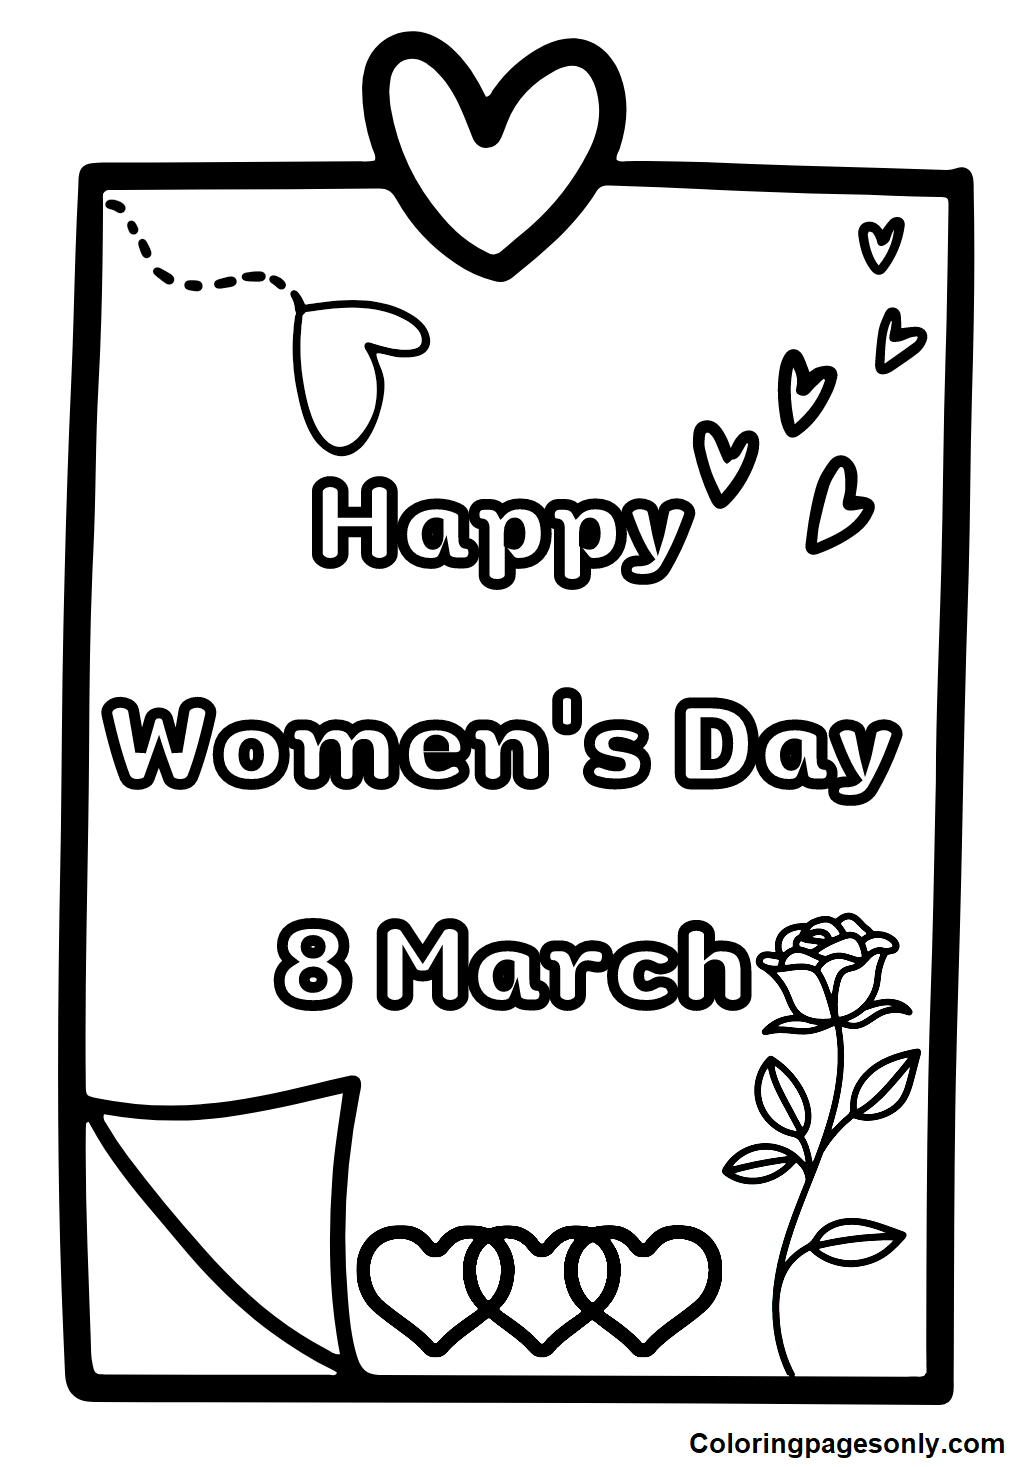 Happy Women’s Day 8 March Coloring Pages